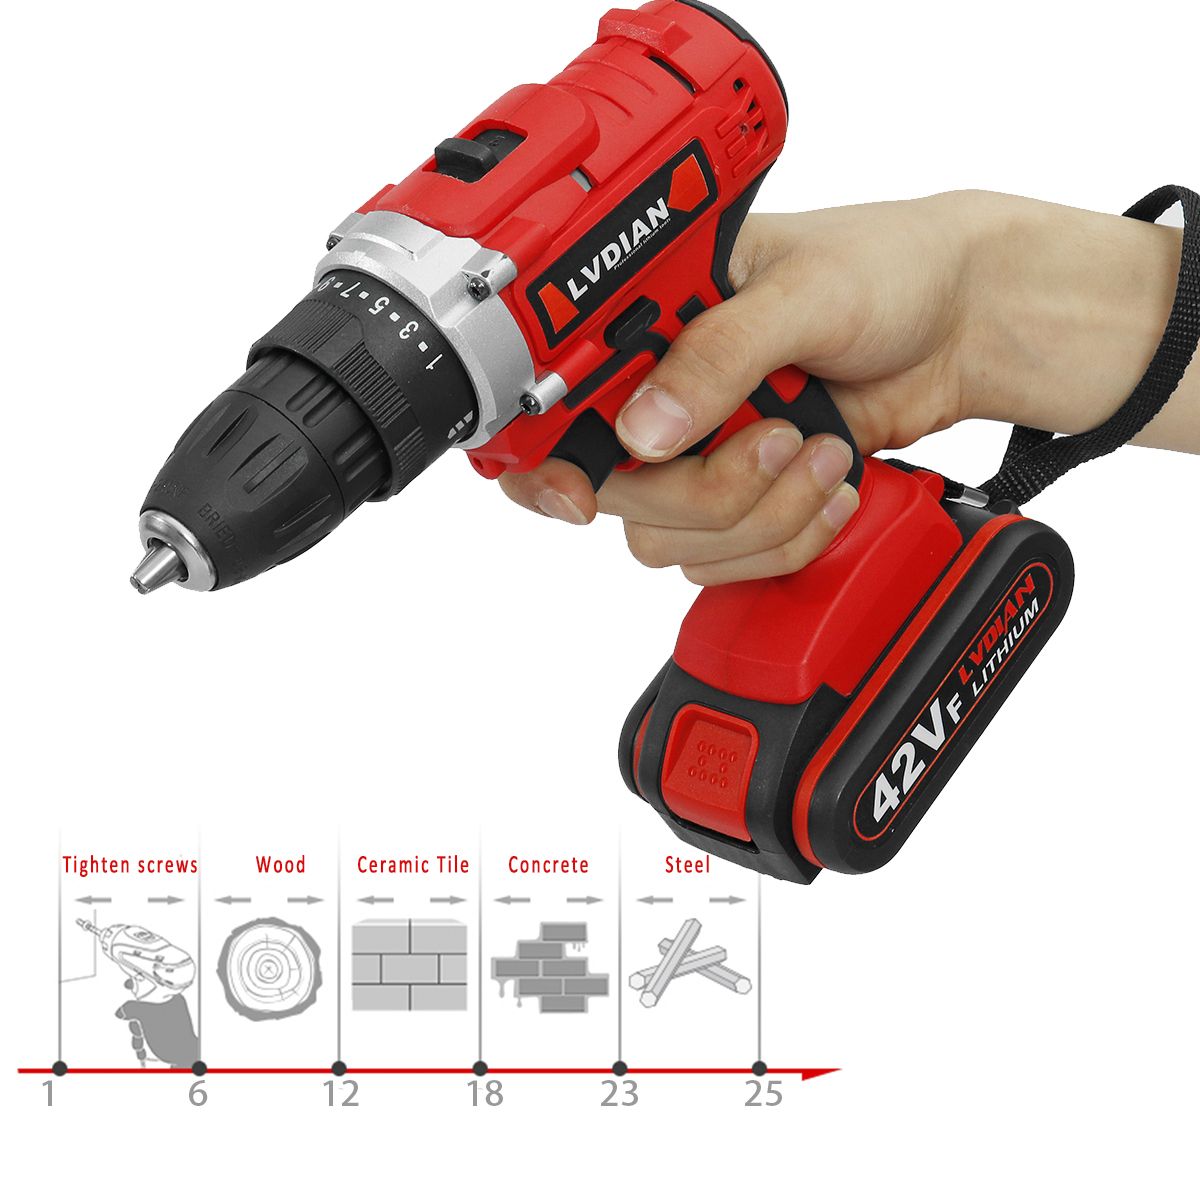 42V-Waterproof-Electric-Hand-Drill-251-Torque-Cordless-Rechargeable-Electric-Drill-Screwdriver-LED-W-1574102